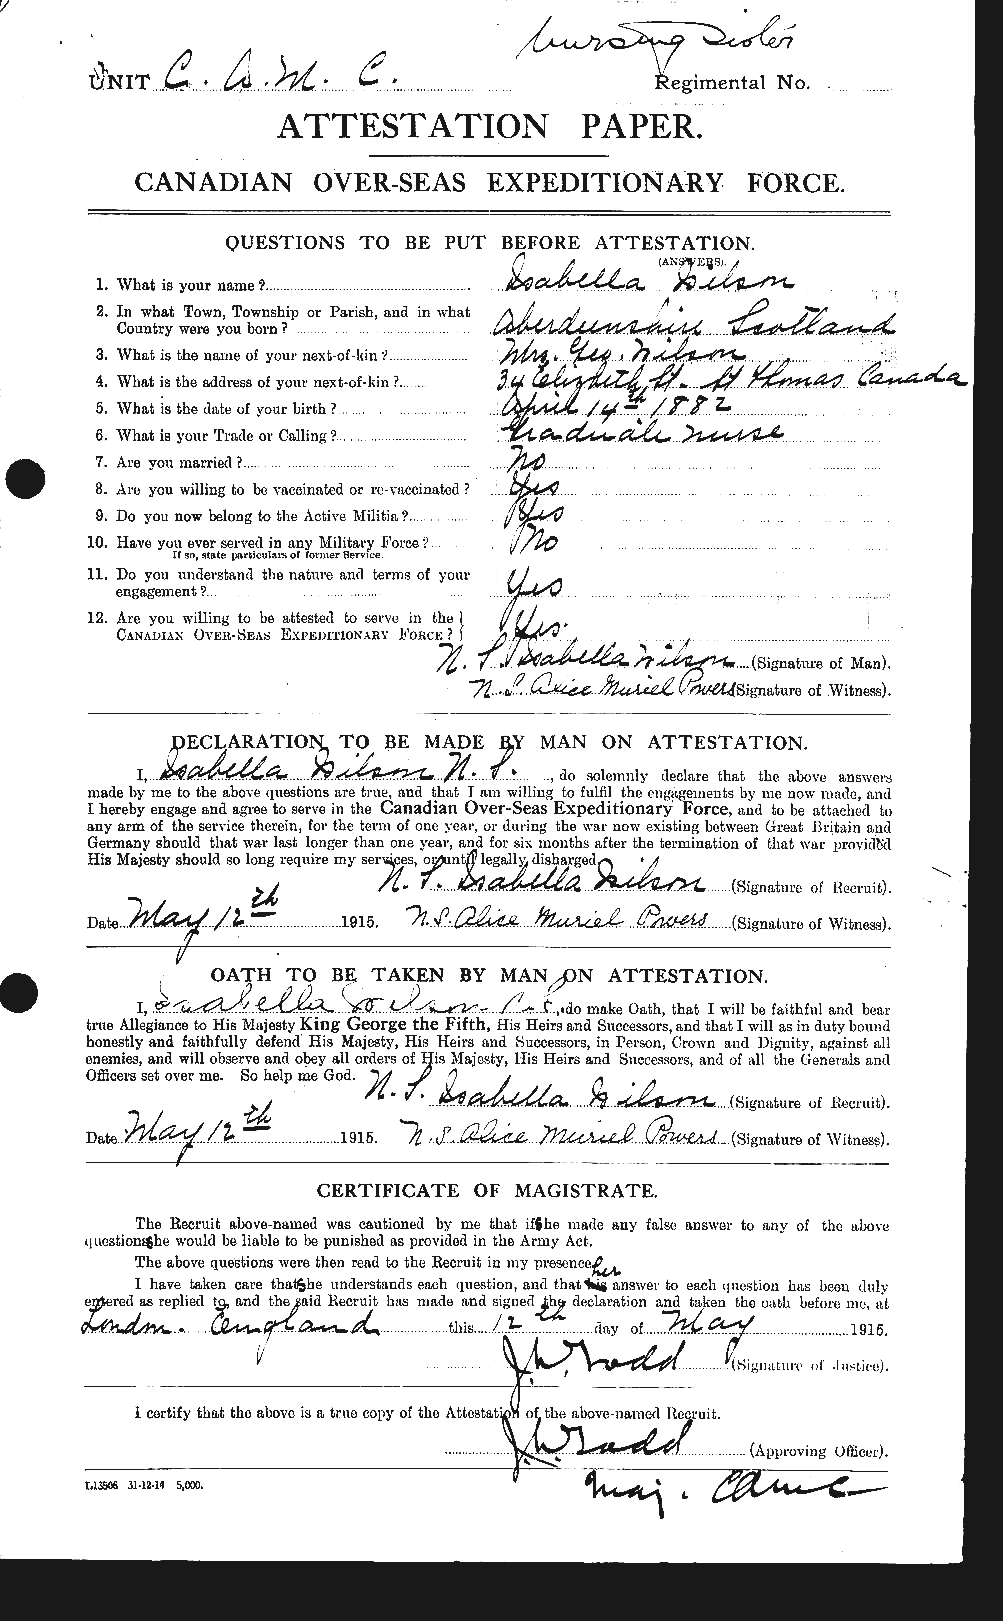 Personnel Records of the First World War - CEF 679629a